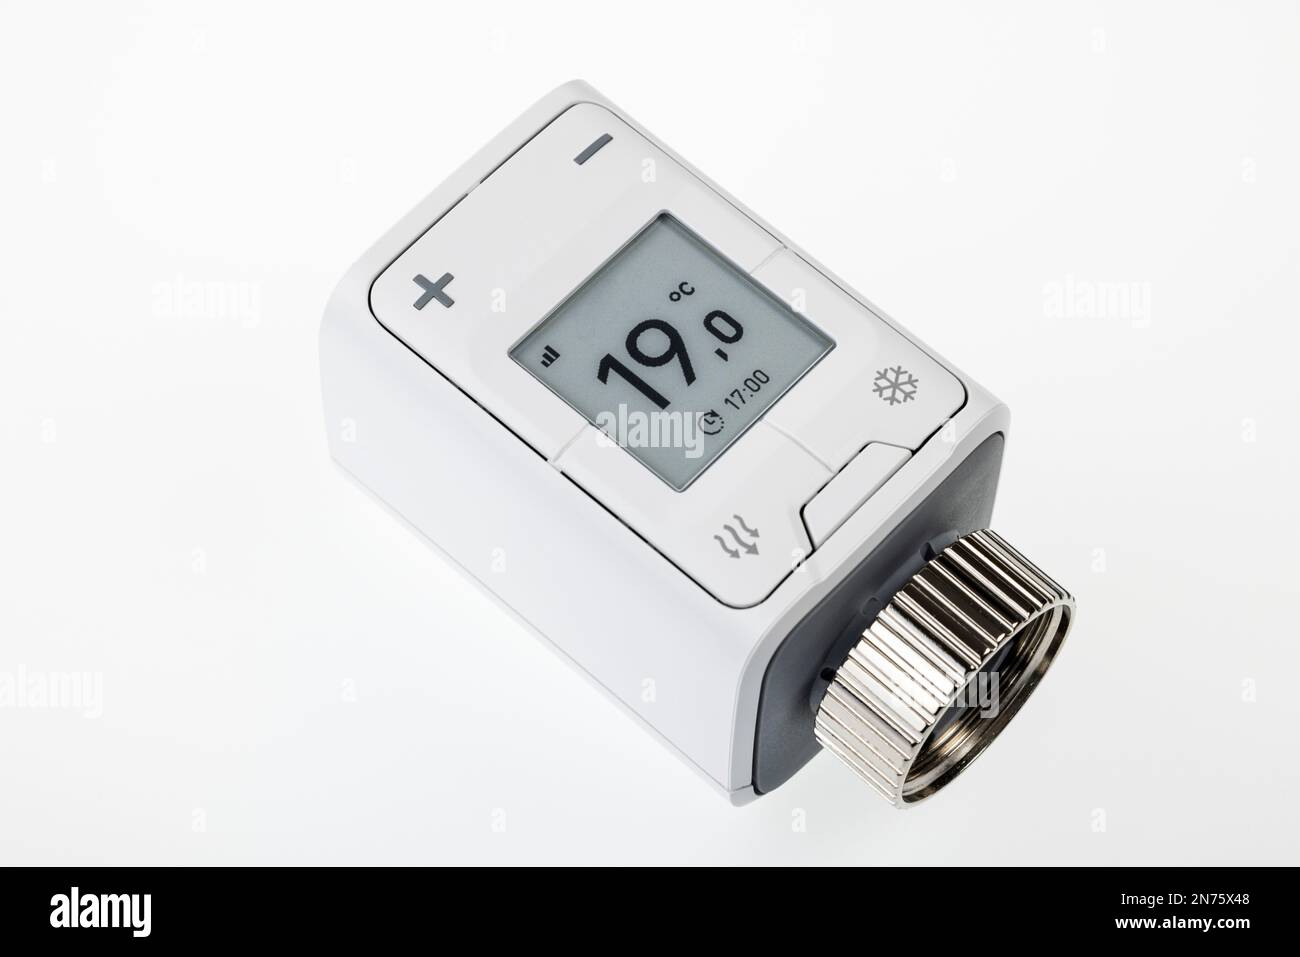 WLAN radiator thermostat FRITZ! DECT 302, display shows 1ö°C., smart home  technology, icon image, networking, digital, energy costs, rising heating  costs, white background Stock Photo - Alamy